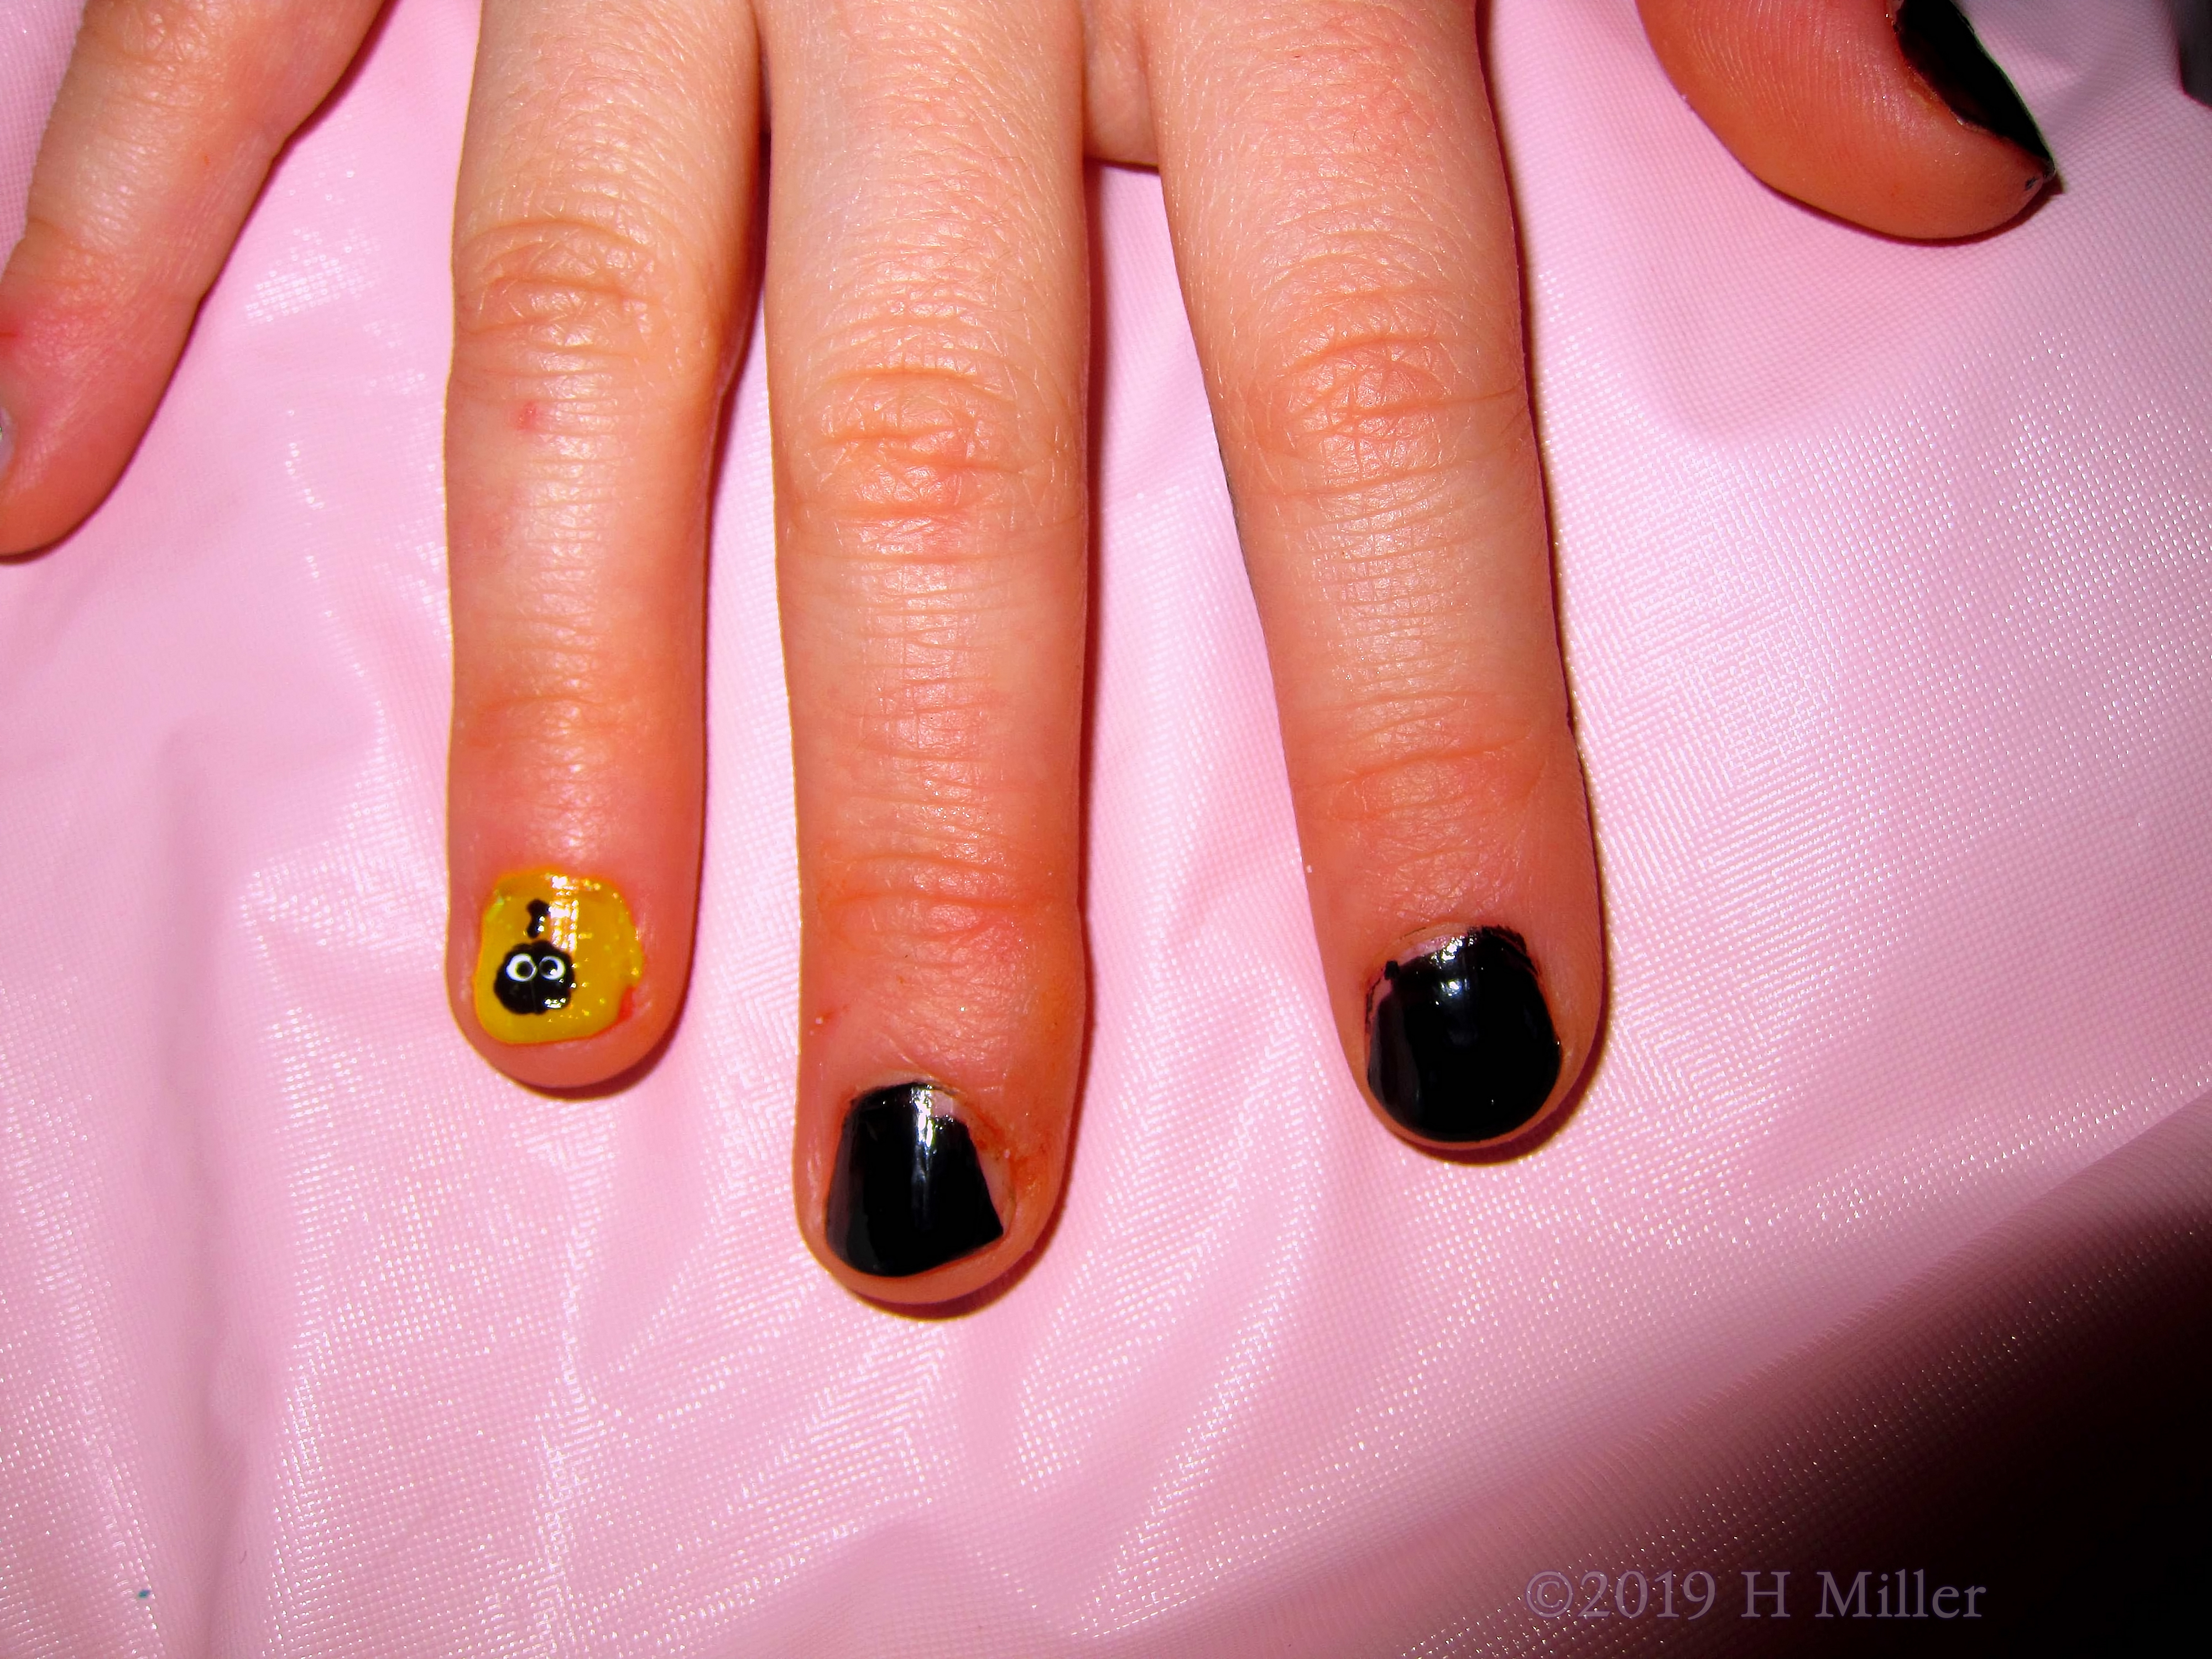 Cool Kids Manicure With Spider Nail Art At The Spa Birthday Party 